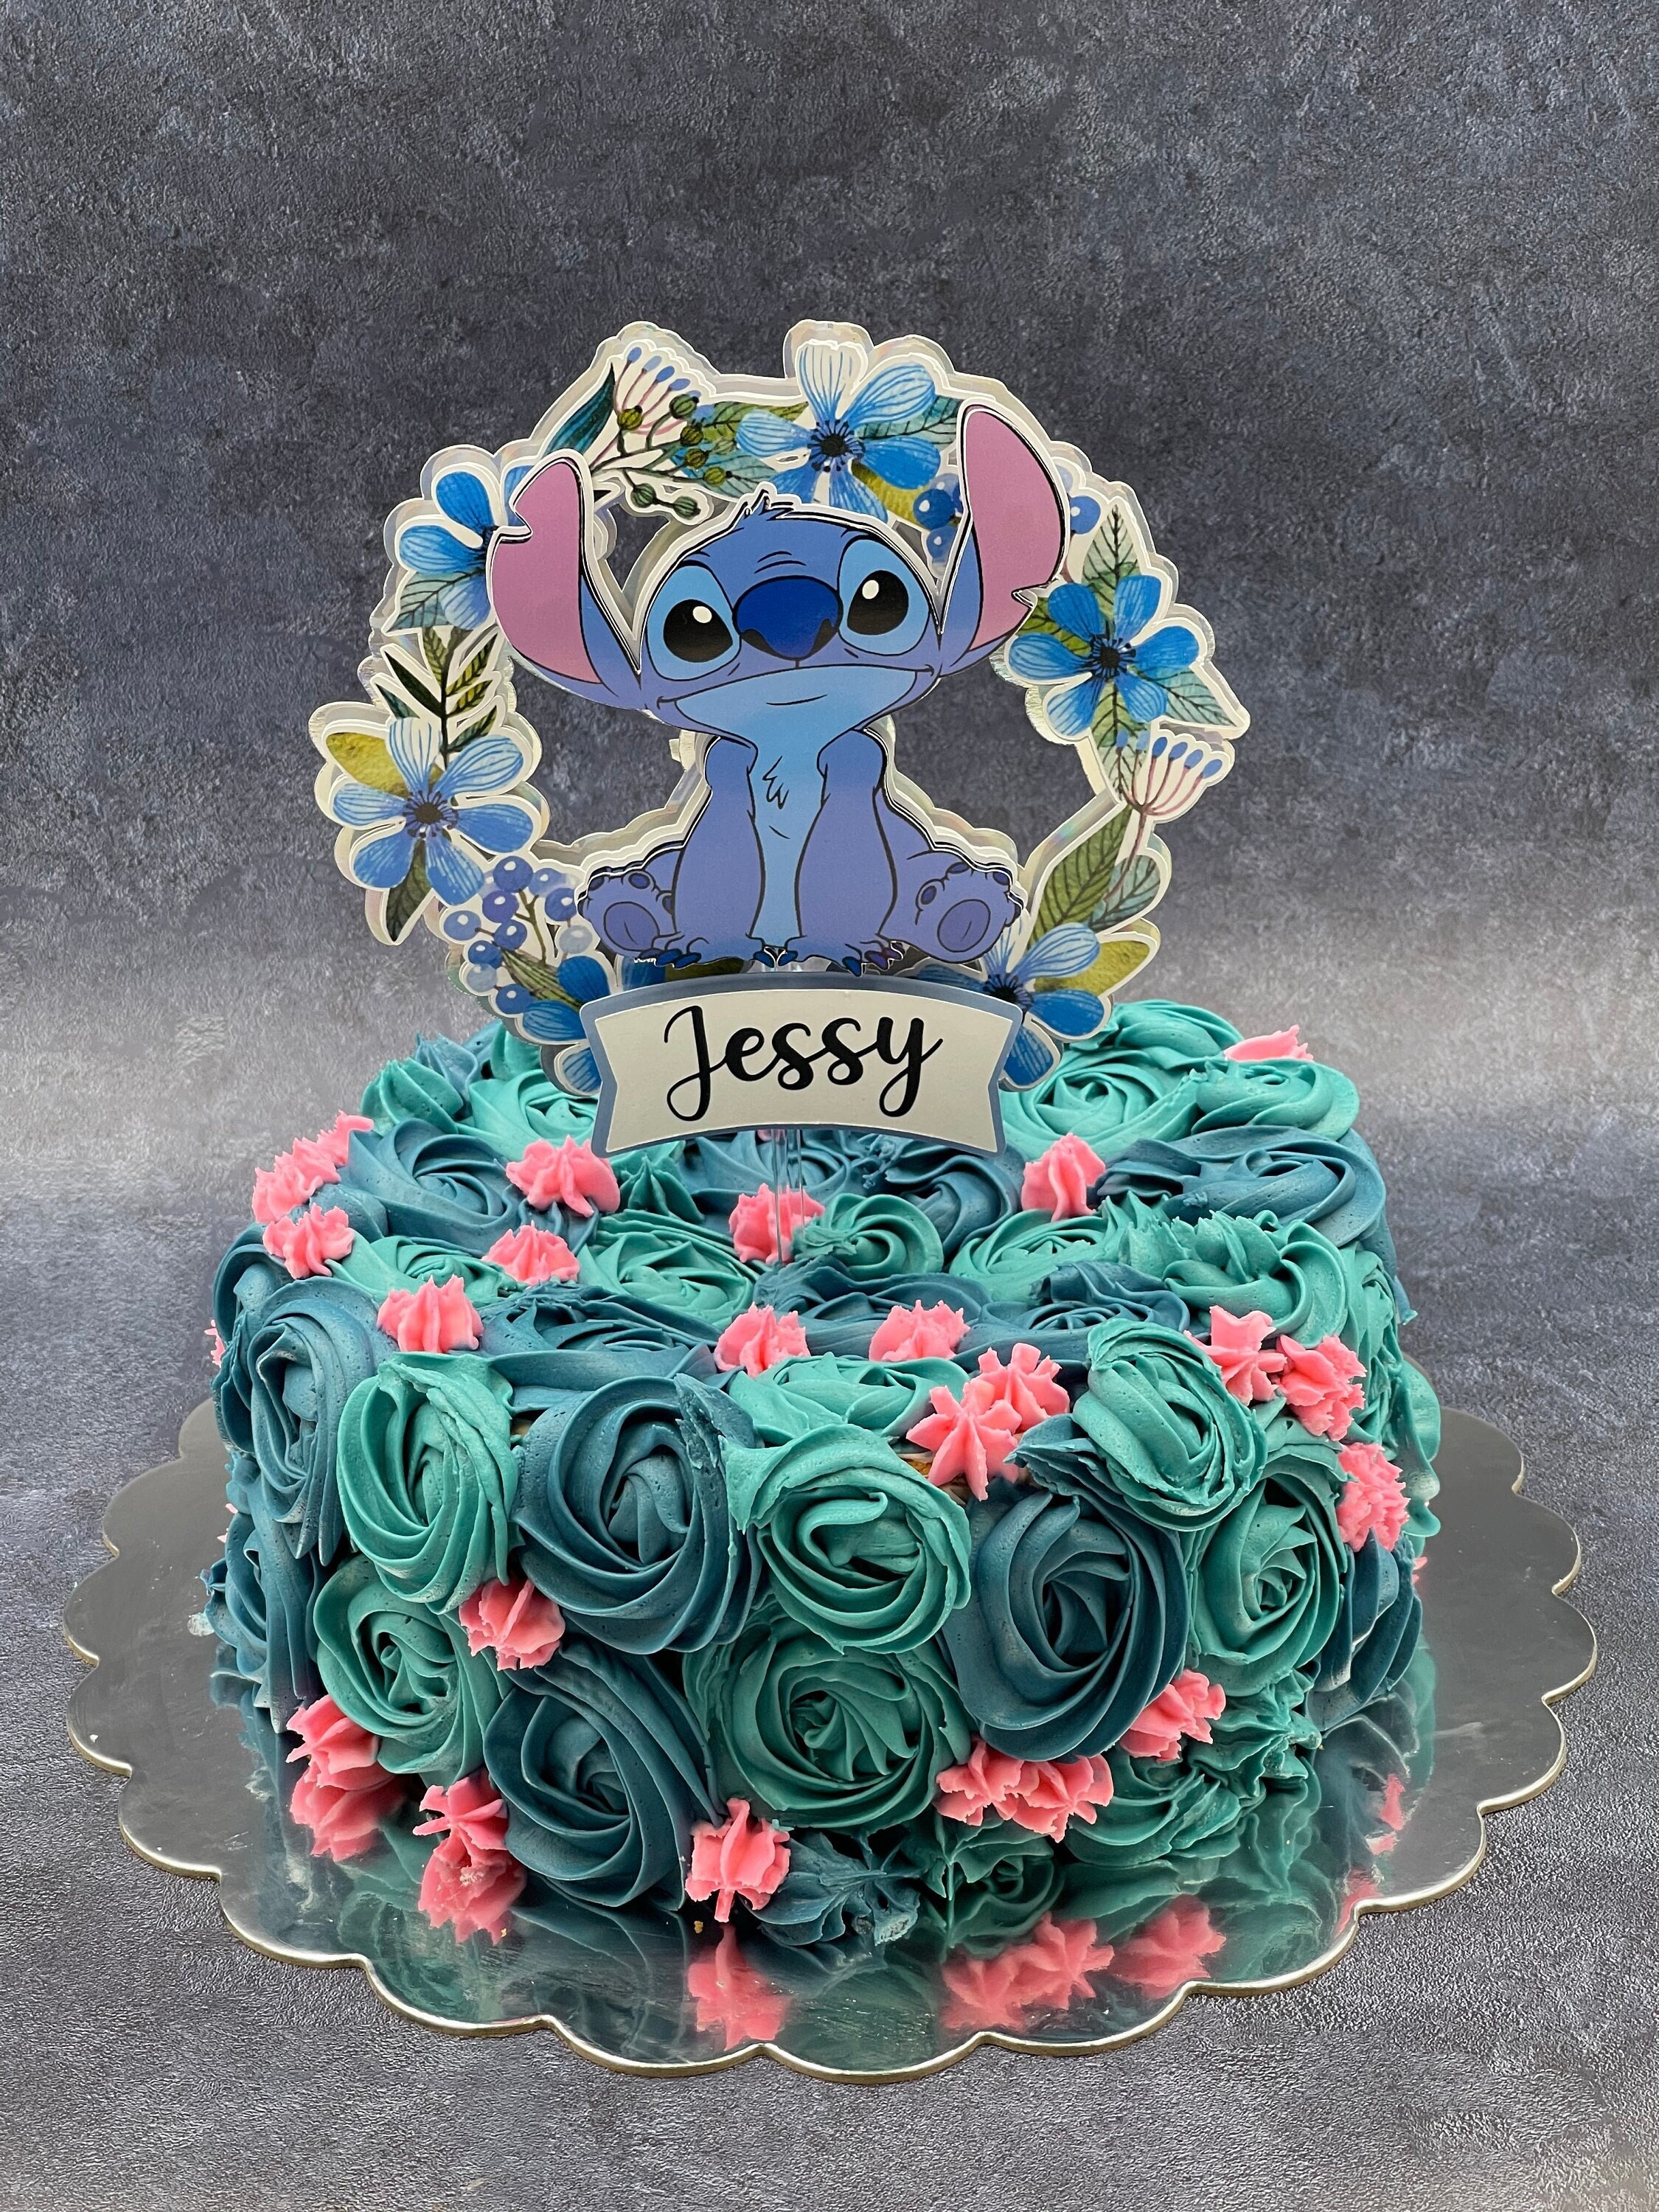 Stitch Cake Topper, Stitch Birthday Supplies, Stitch Party Decor, Stitch  Cupcakes Toppers, Stitch 3D Letters, Party Decorations -  Canada